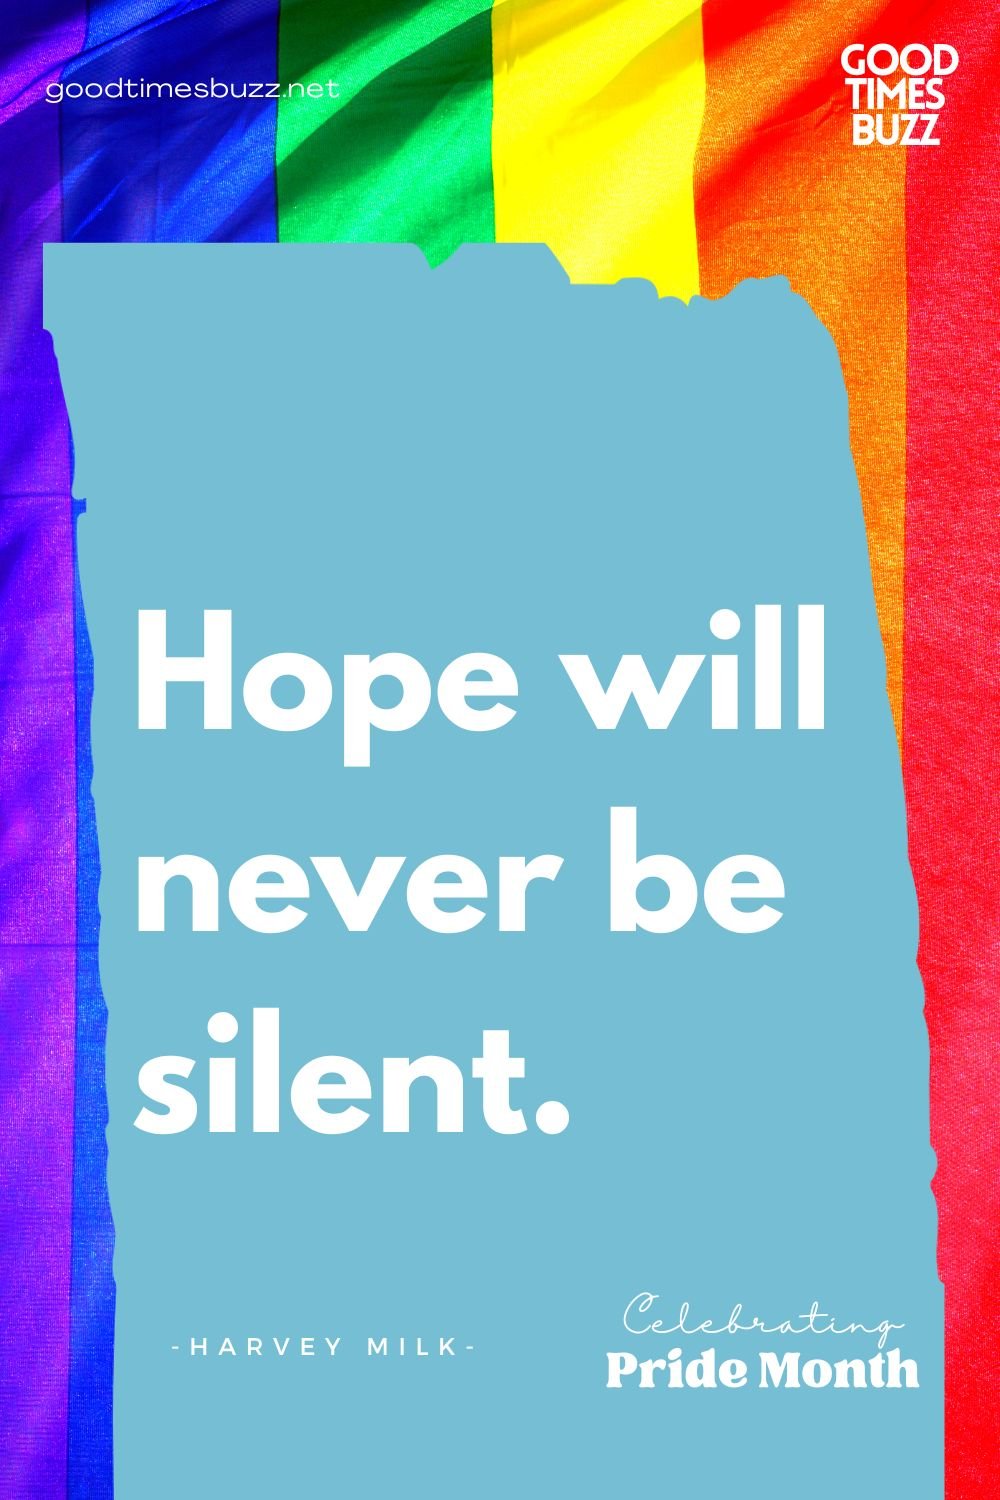 Hope will never be silent quote